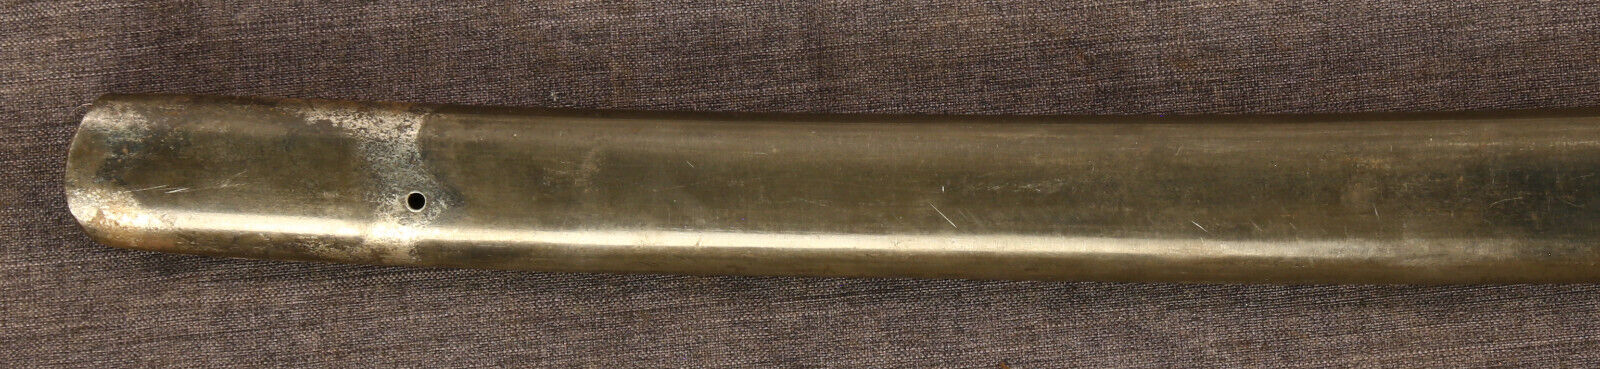 M1850 US Staff and Field or Foot Officer sword scabbard body (#5)